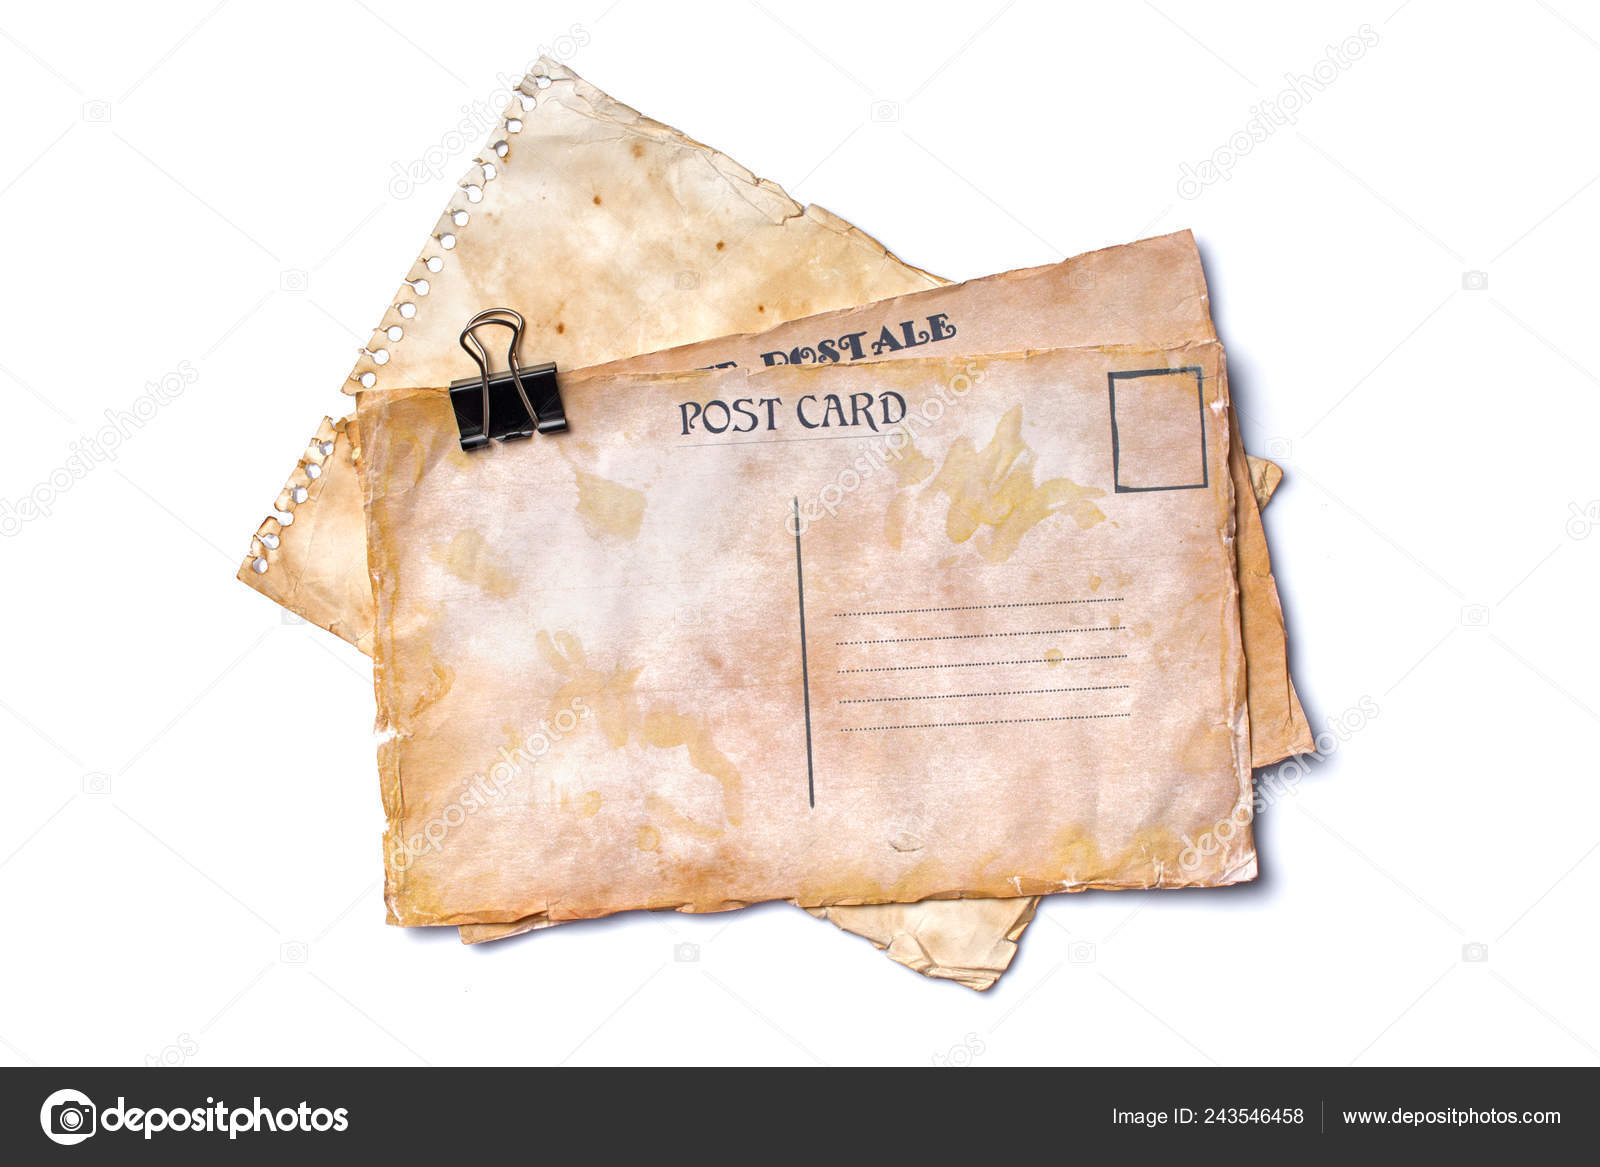 Download Mockup Empty Old Vintage Paper Sheets Post Cards Clip Isolated Stock Photo Image By C Viktoriya89 243546458